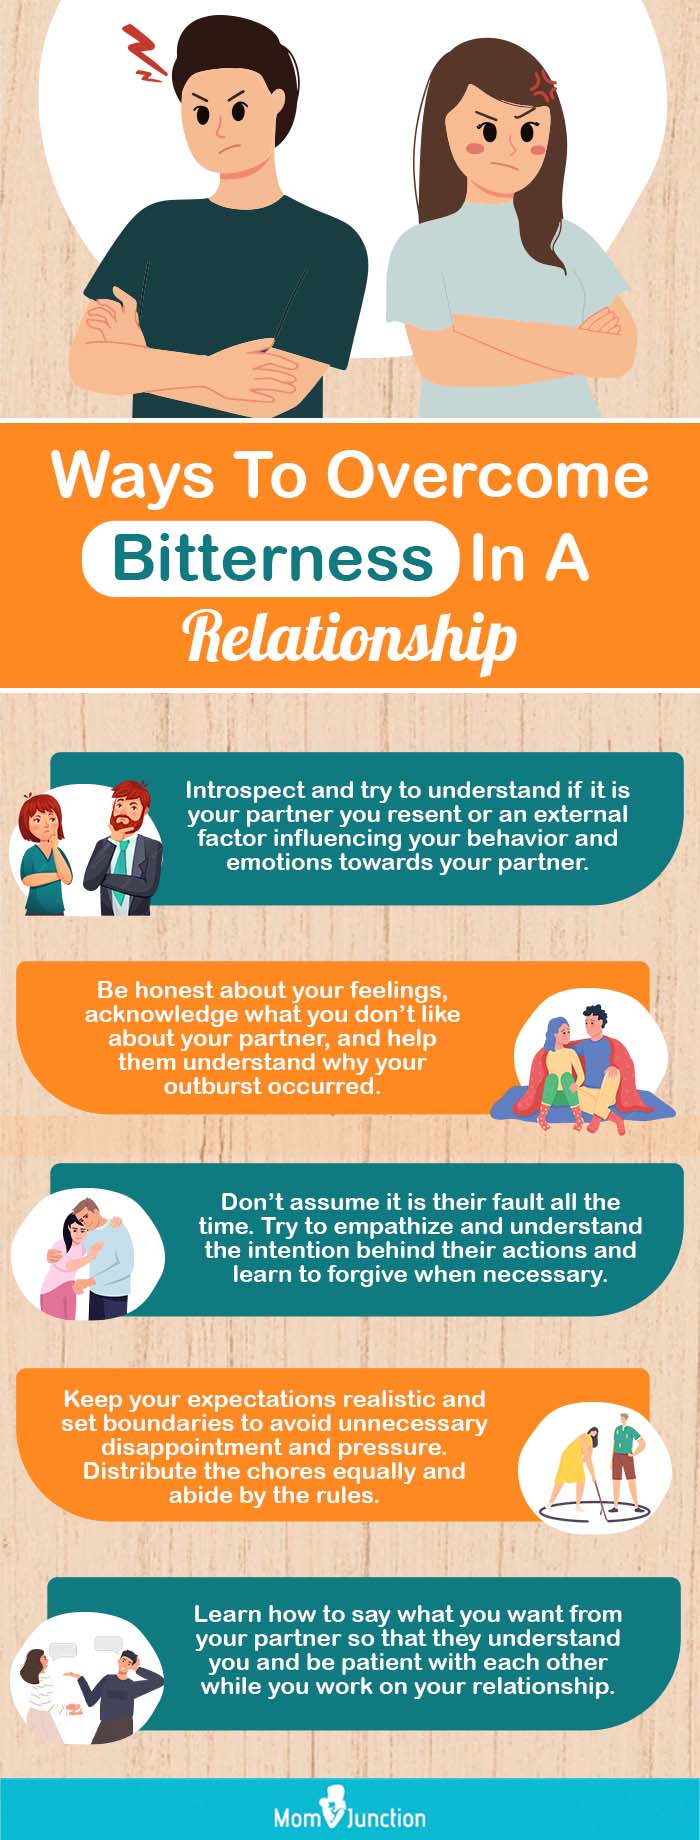 ways to overcome bitterness in a relationship (infographic)